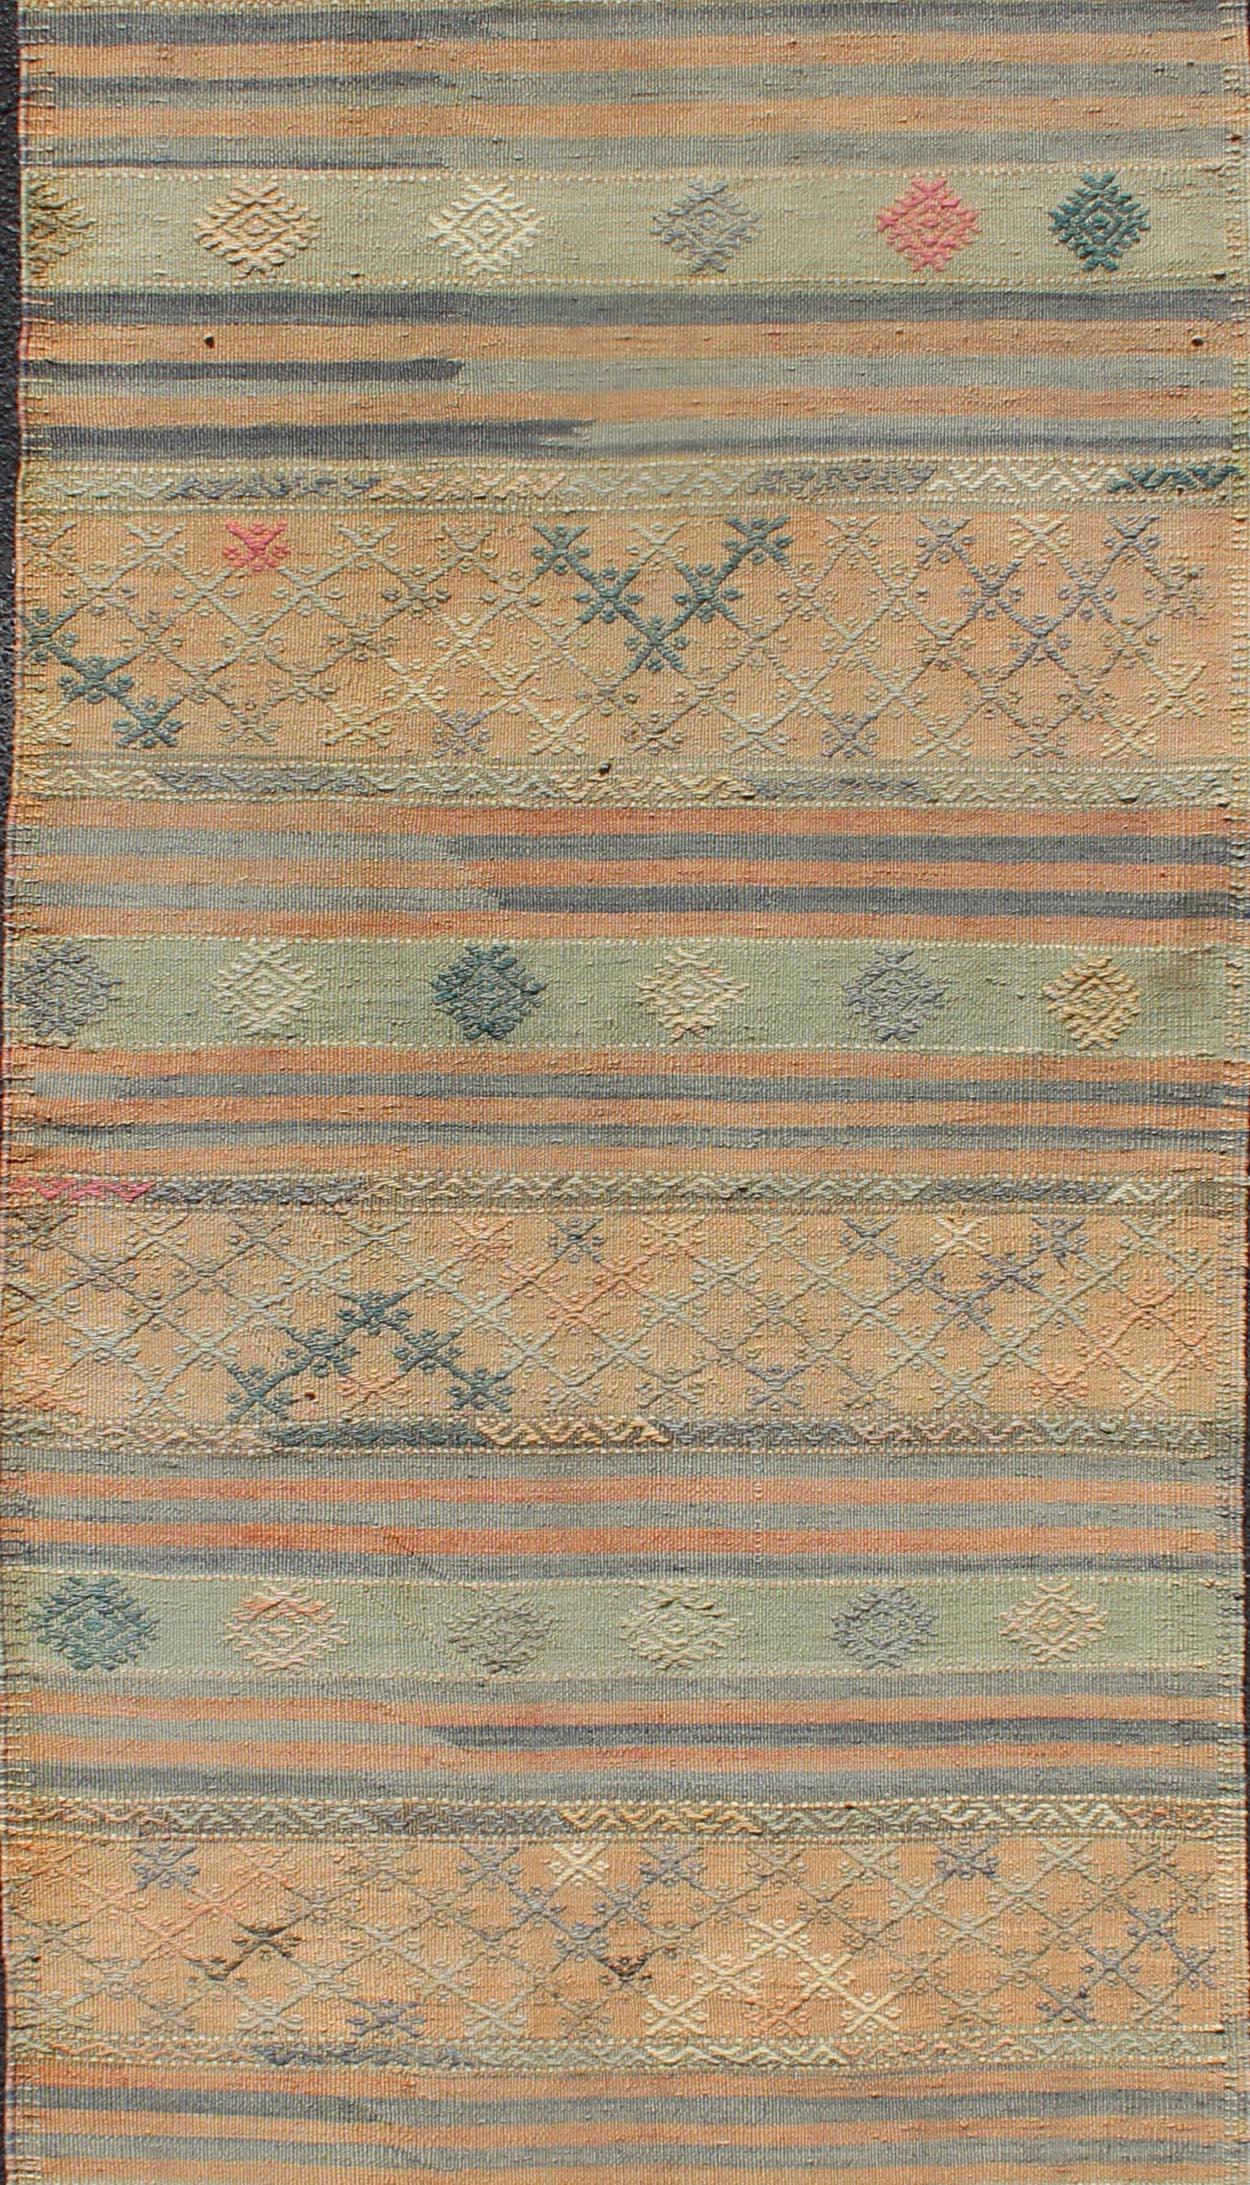 Vintage Turkish Kilim Runner with Geometric Design and Colorful Stripes In Good Condition For Sale In Atlanta, GA